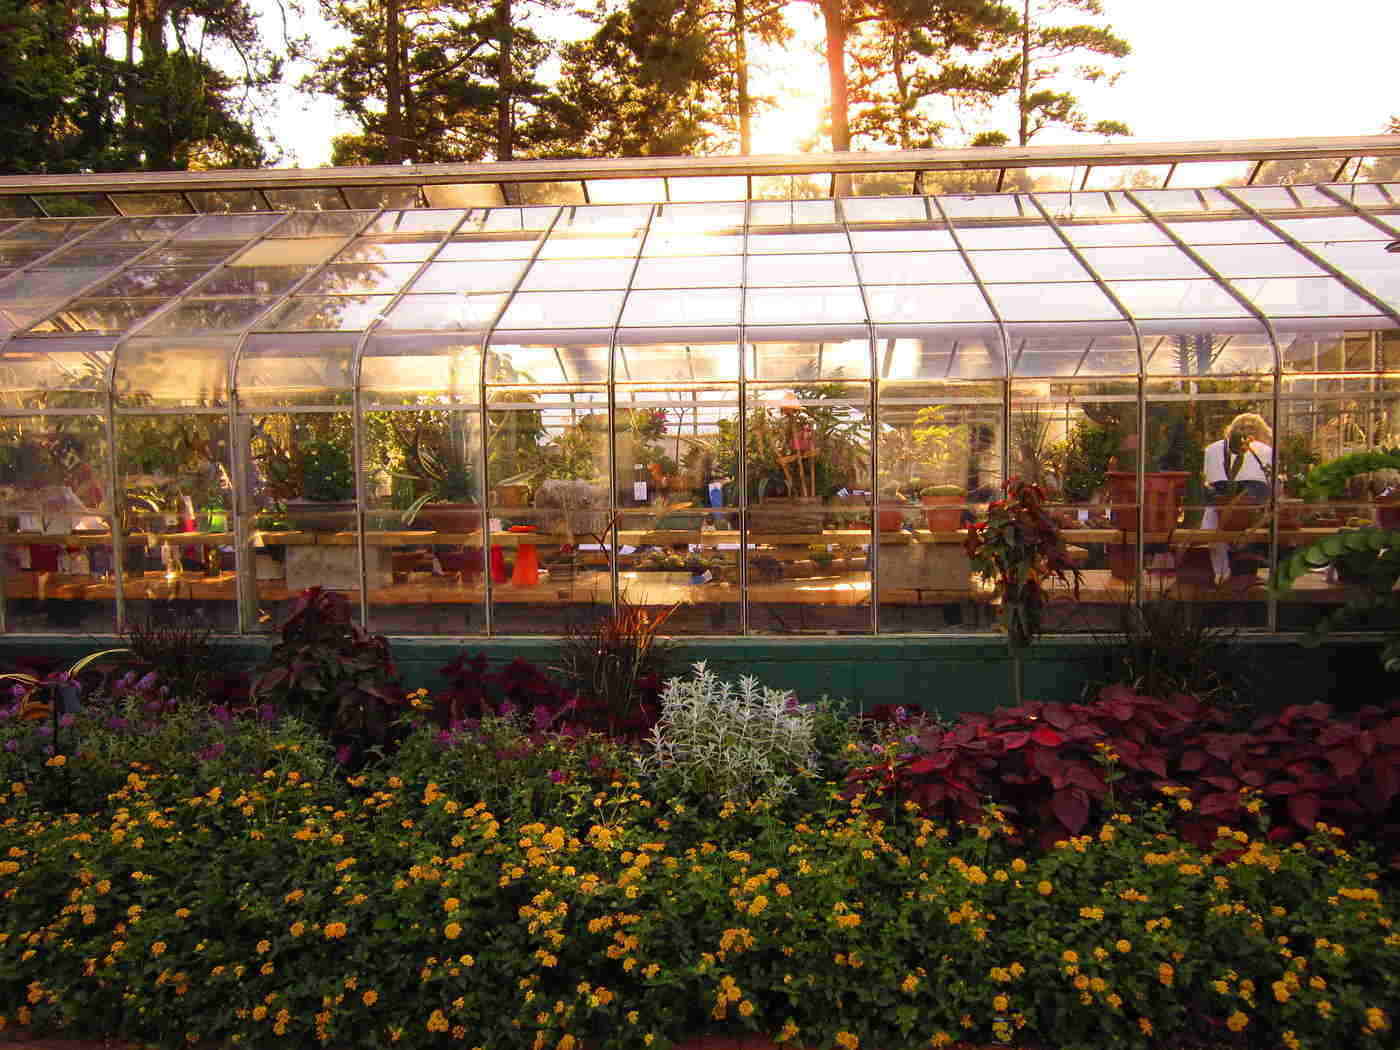 outside view of greenhouse with flowers - top 5 tips for starting a greenhouse